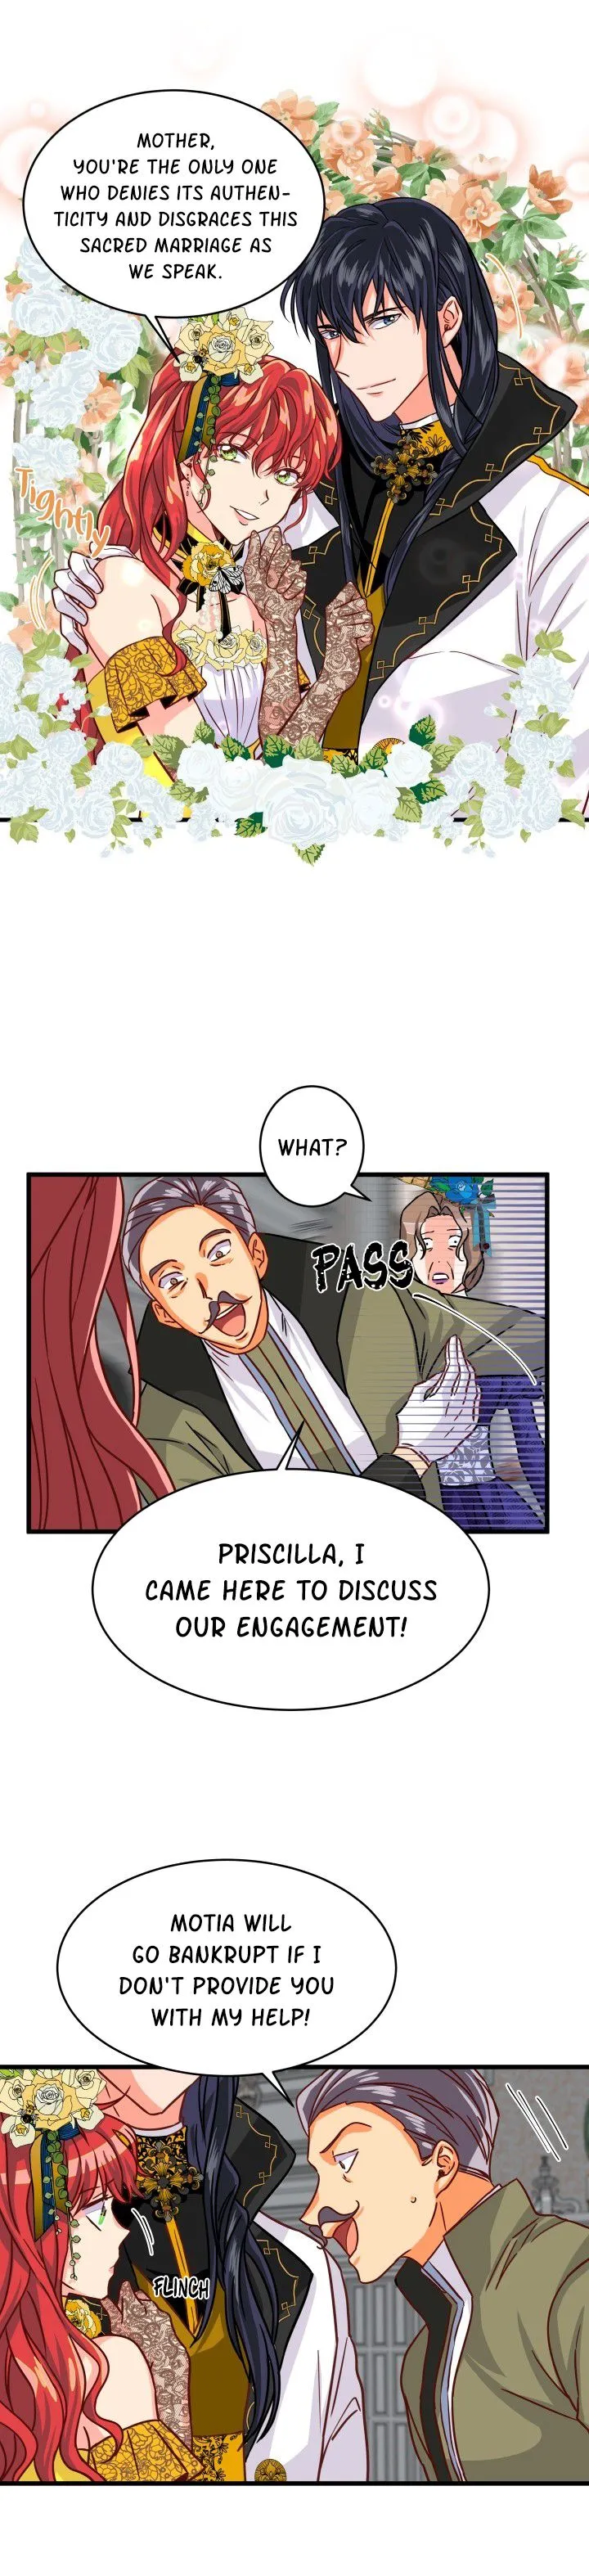 Priscilla's Marriage Request Chapter 9 page 18